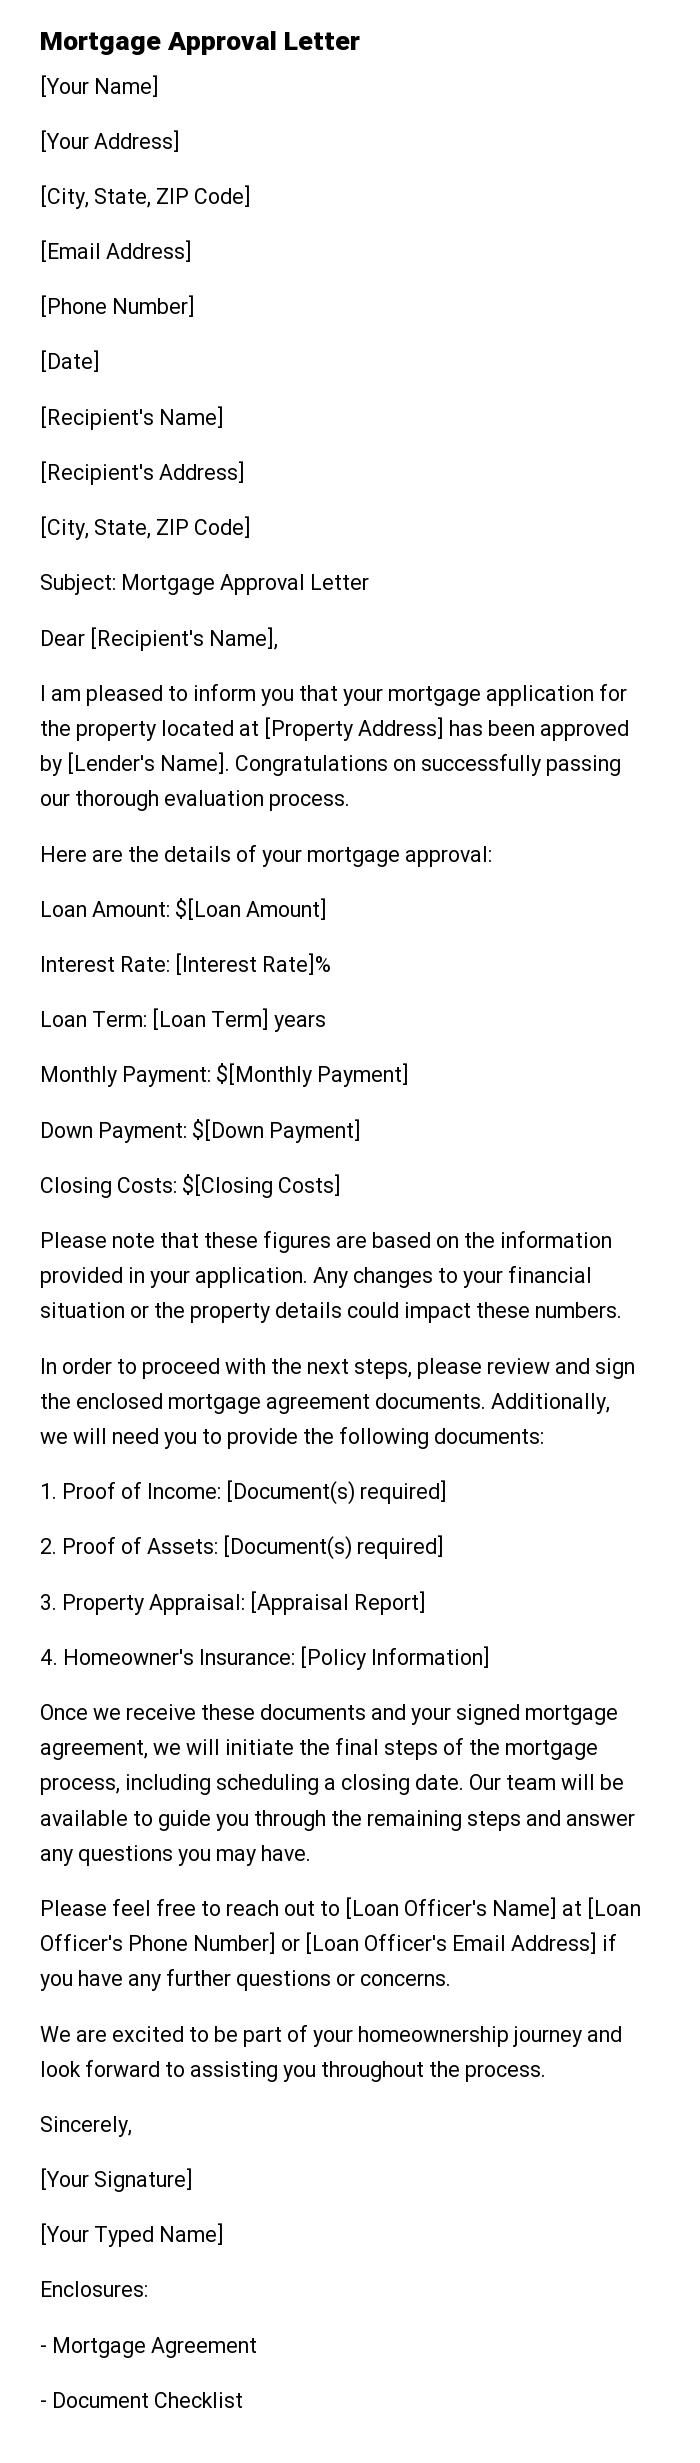 Mortgage Approval Letter